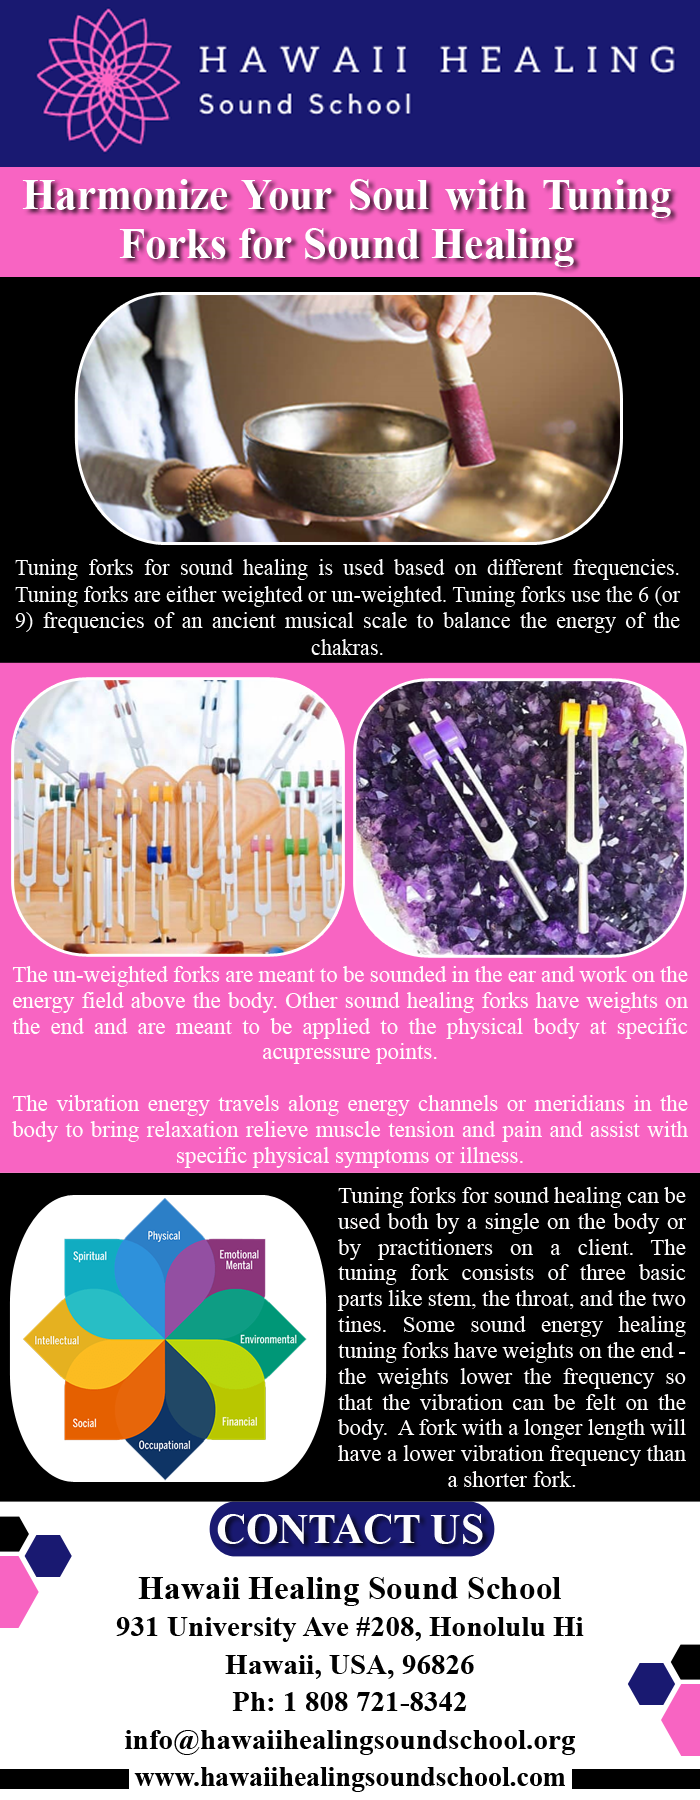 Harmonize Your Soul with Tuning Forks for Sound Healing Tuning forks for sound healing is used based on different frequencies. Tuning forks are either weighted or un-weighted. For more details, visit: https://www.hawaiihealingsoundschool.com/events/event/tuning-forks/
 by hawaiihealingusa